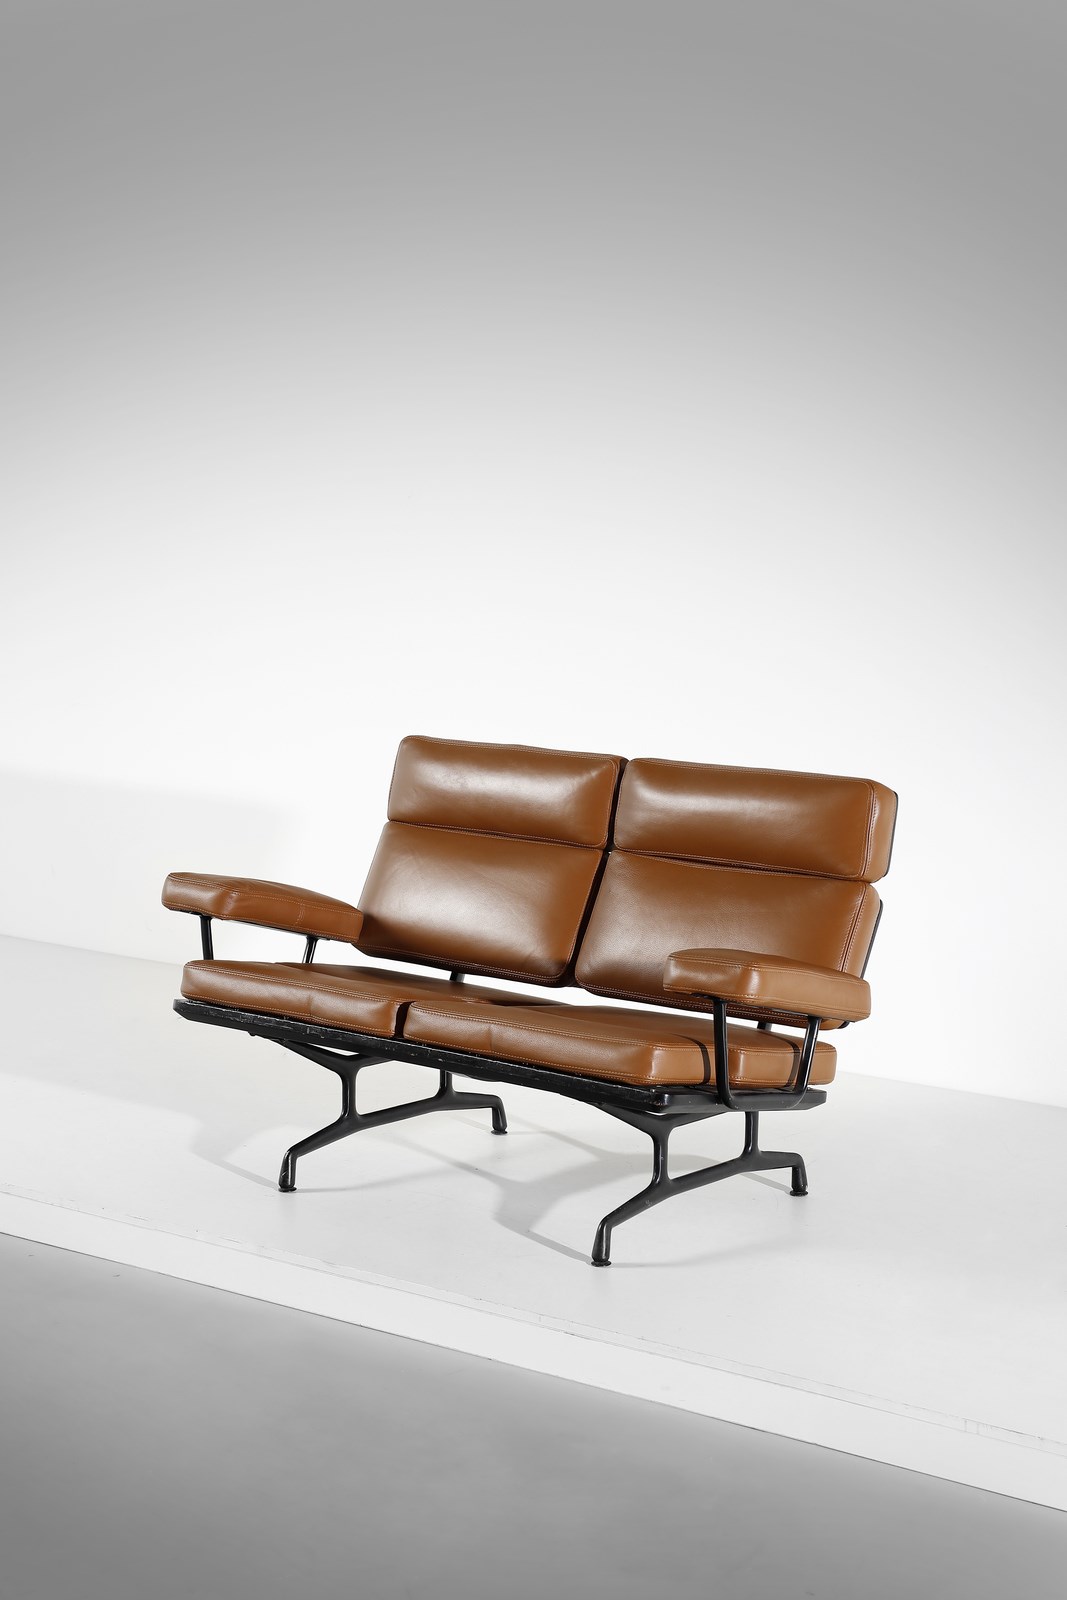 Divanetto (Charles (1907-1978) & Ray (1912-1988) Eames)